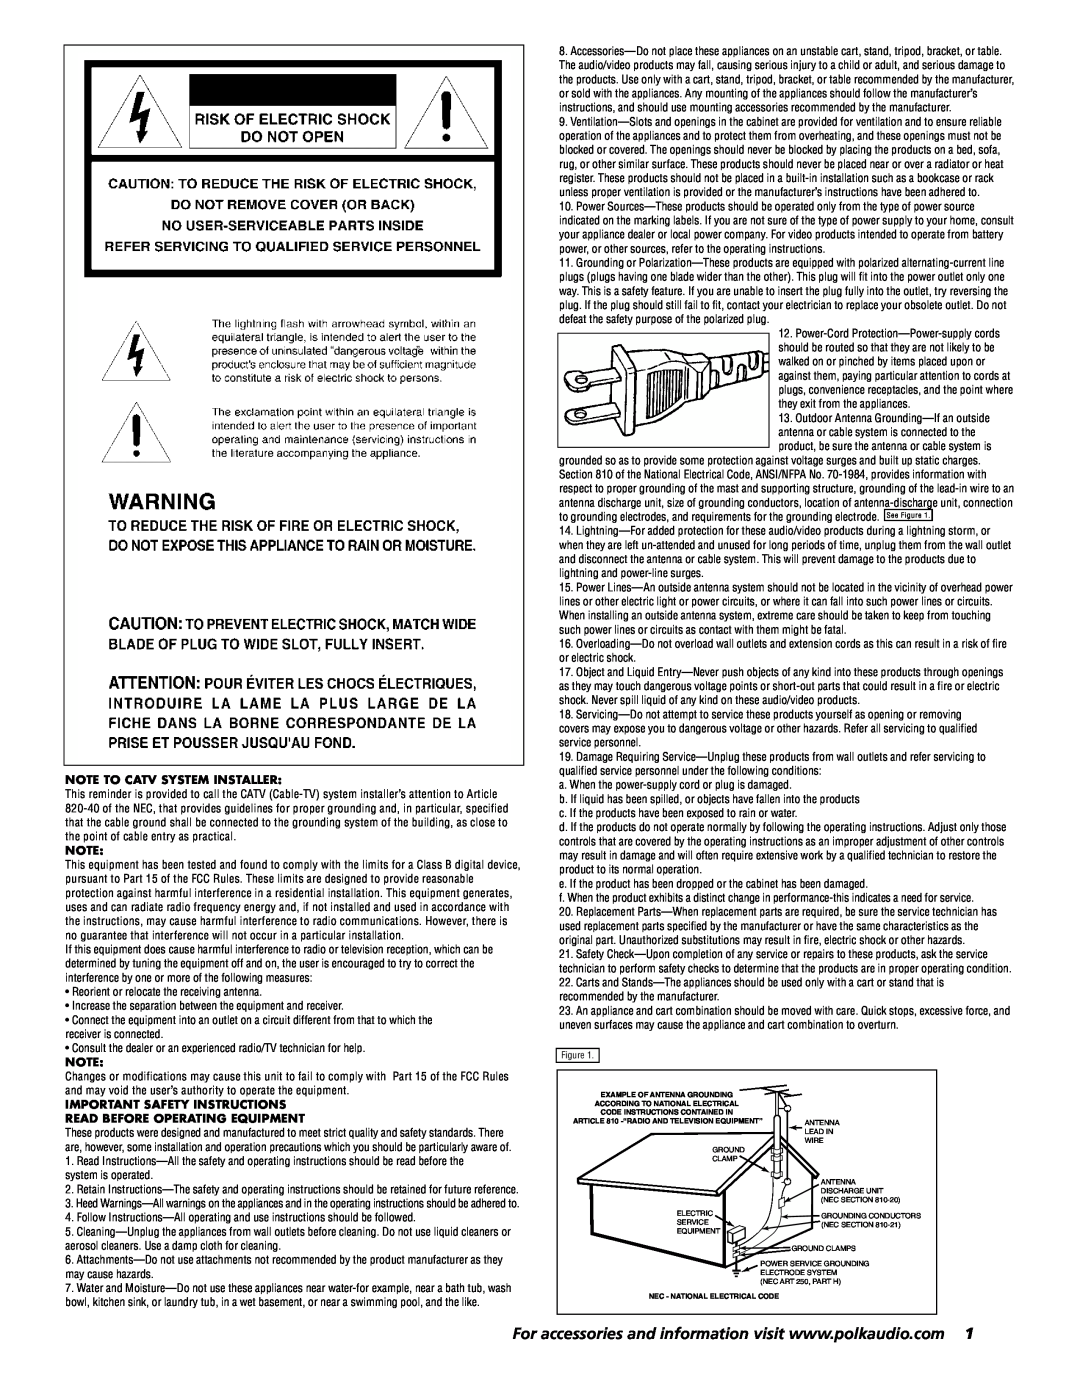 Polk Audio AMR130 Note To Catv System Installer, Important Safety Instructions, Read Before Operating Equipment 